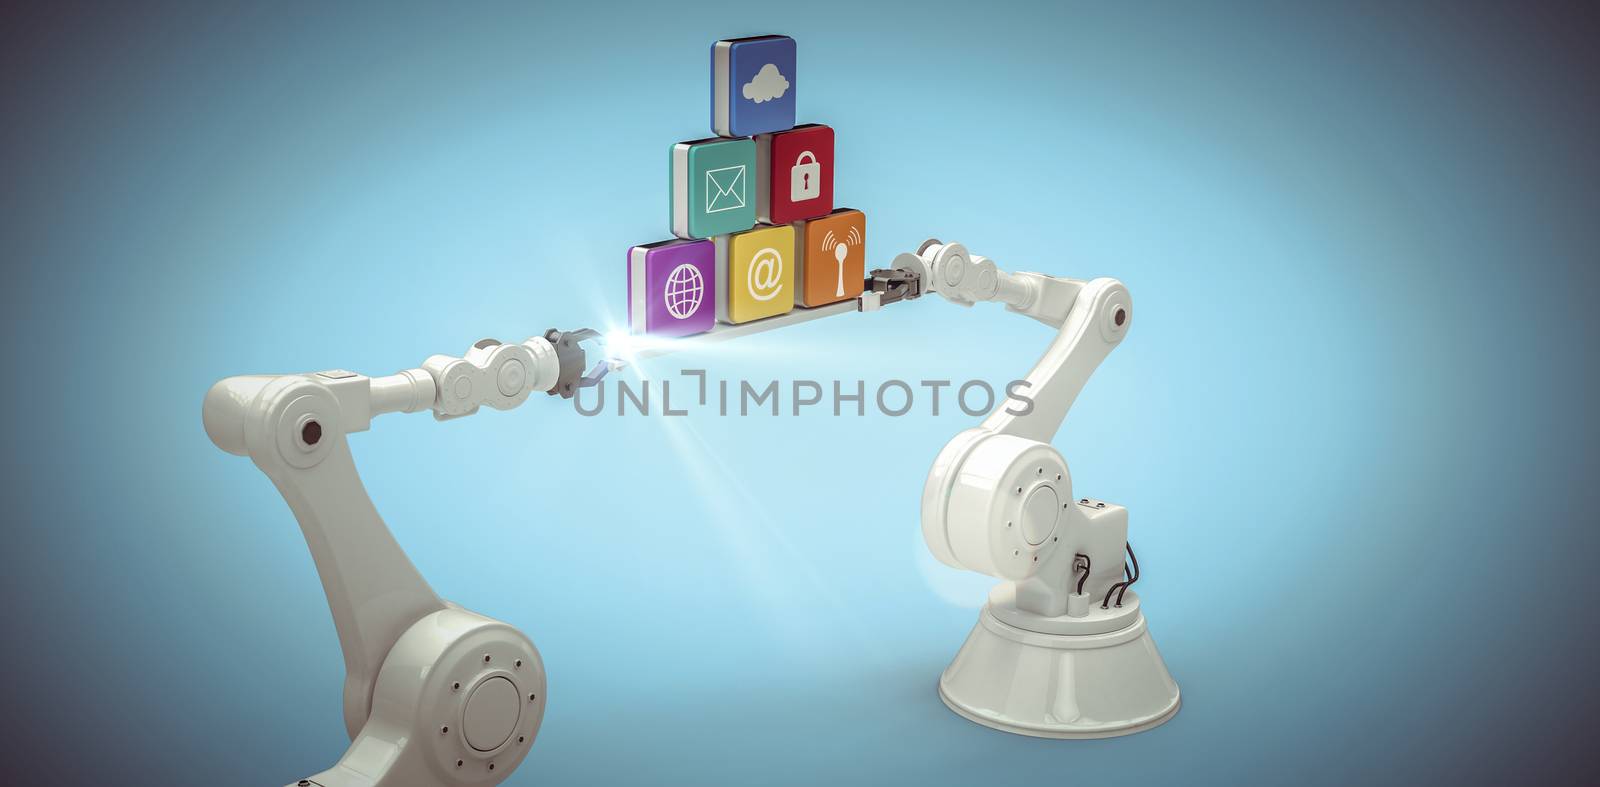 White robotic hands holding computer icons against white background against blue background